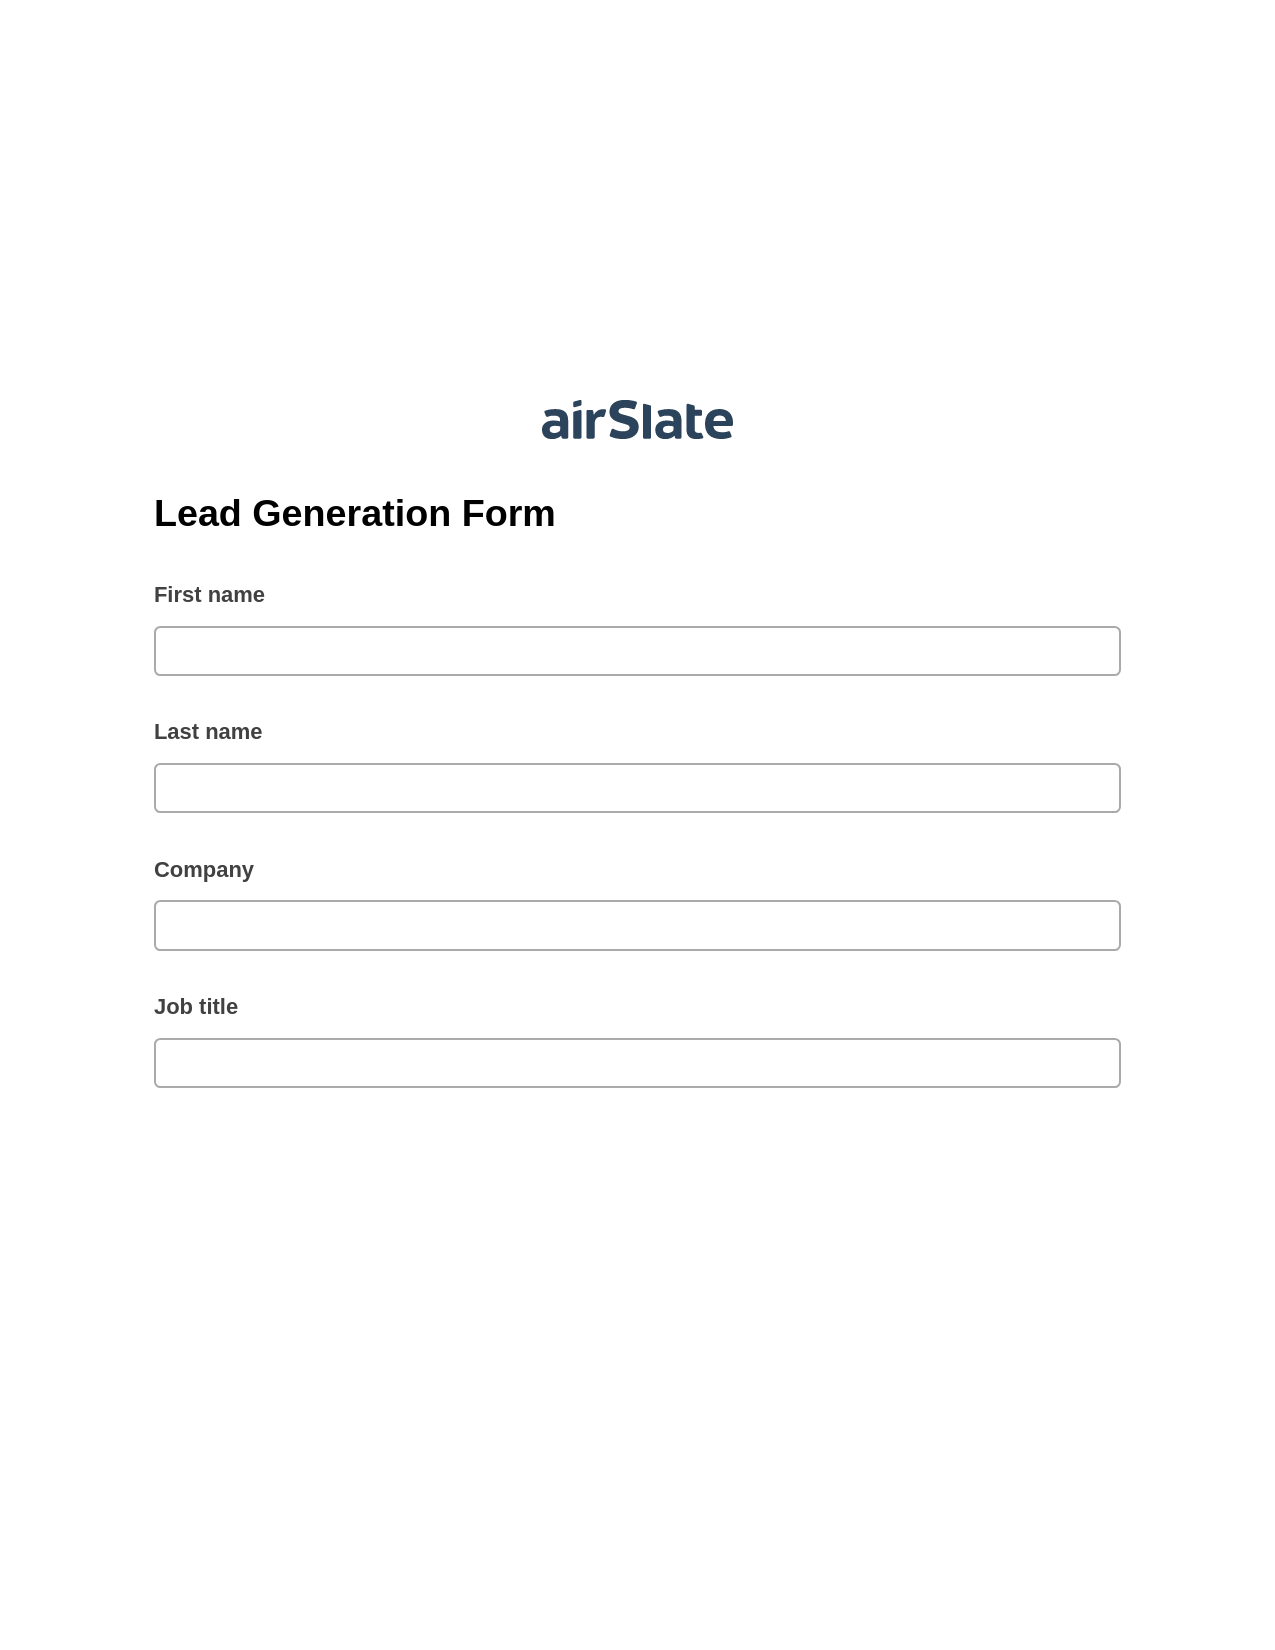 Multirole Lead Generation Form Pre-fill from Salesforce Records Bot, Create Slate every Google Sheet Update Bot, Export to Salesforce Record Bot